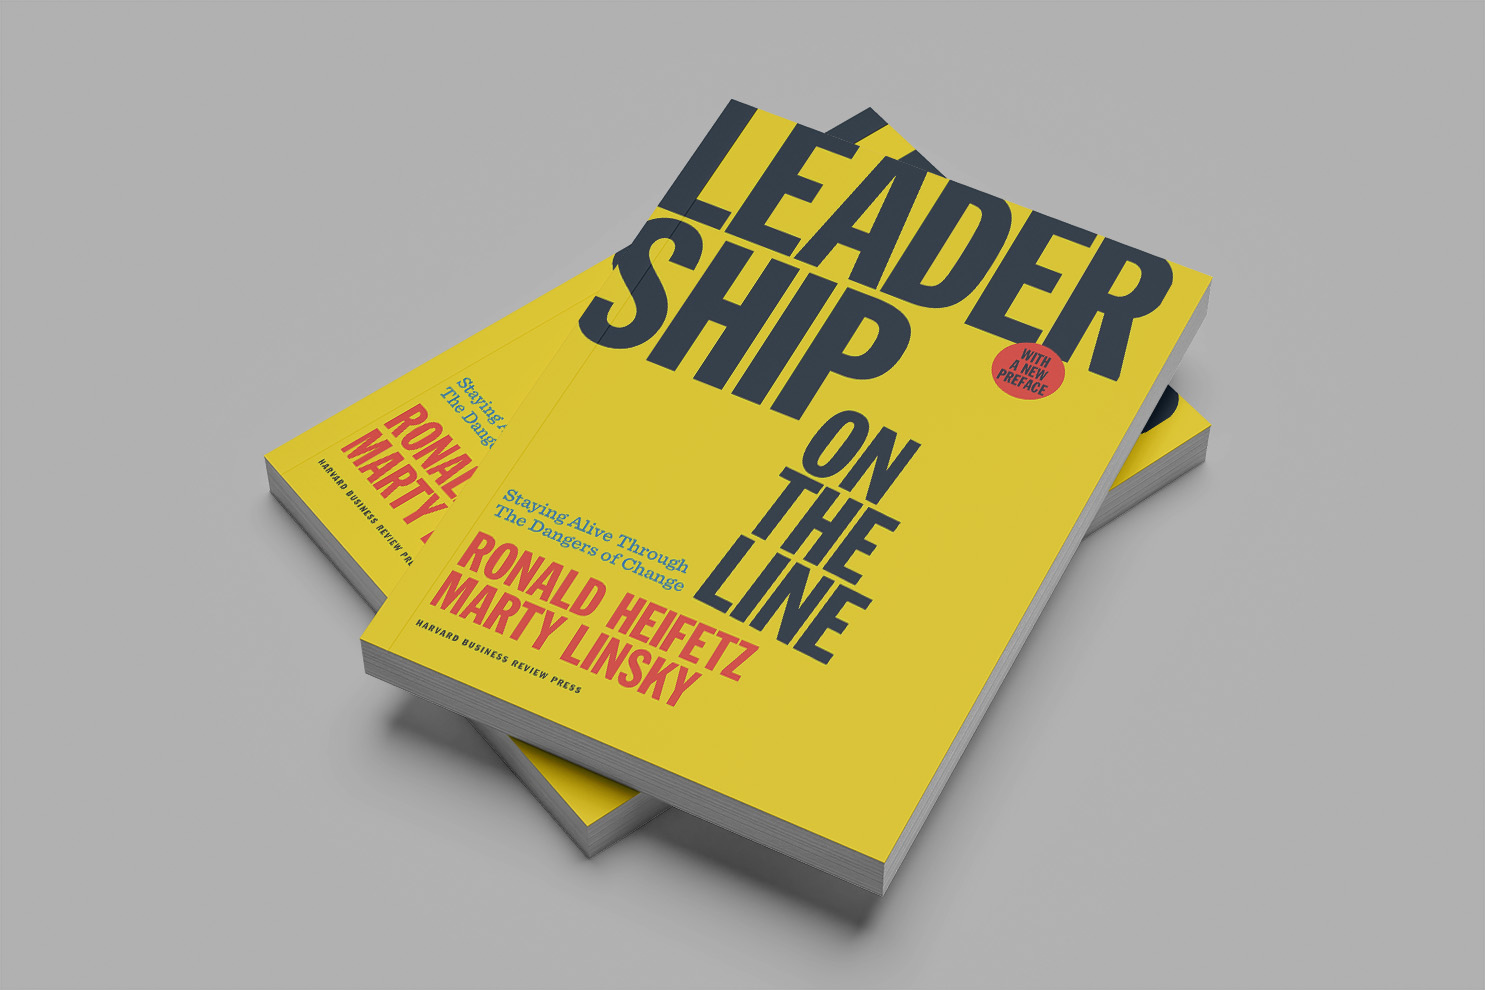 Leadership on the Line by Ronald Heifetz and Marty Linsky